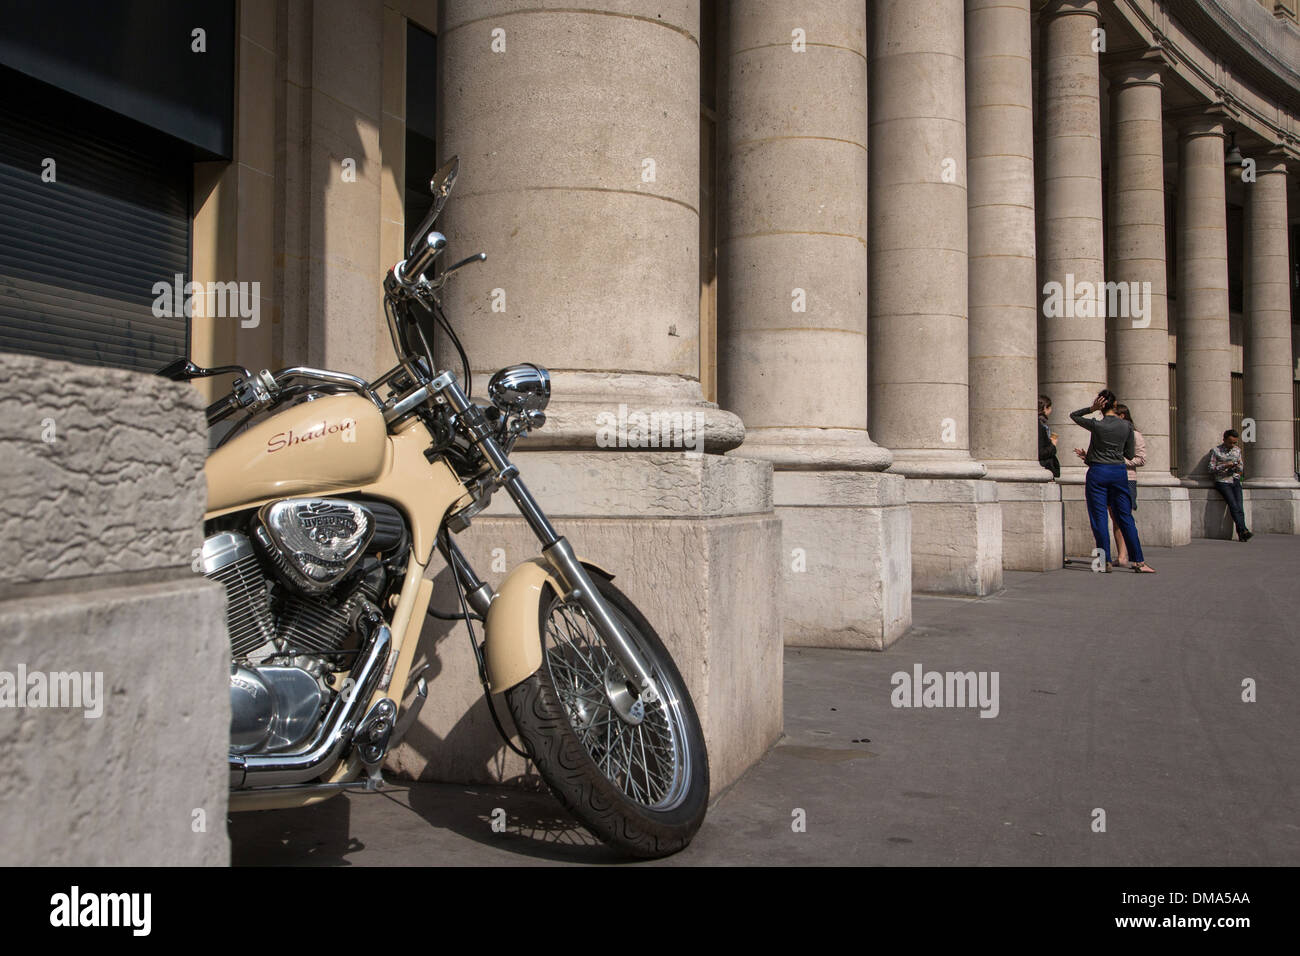 MOTORCYCLE IN FRONT OF A COLUMNED BUILDING ON RUE SAUVAL, PARIS (75), FRANCE Stock Photo